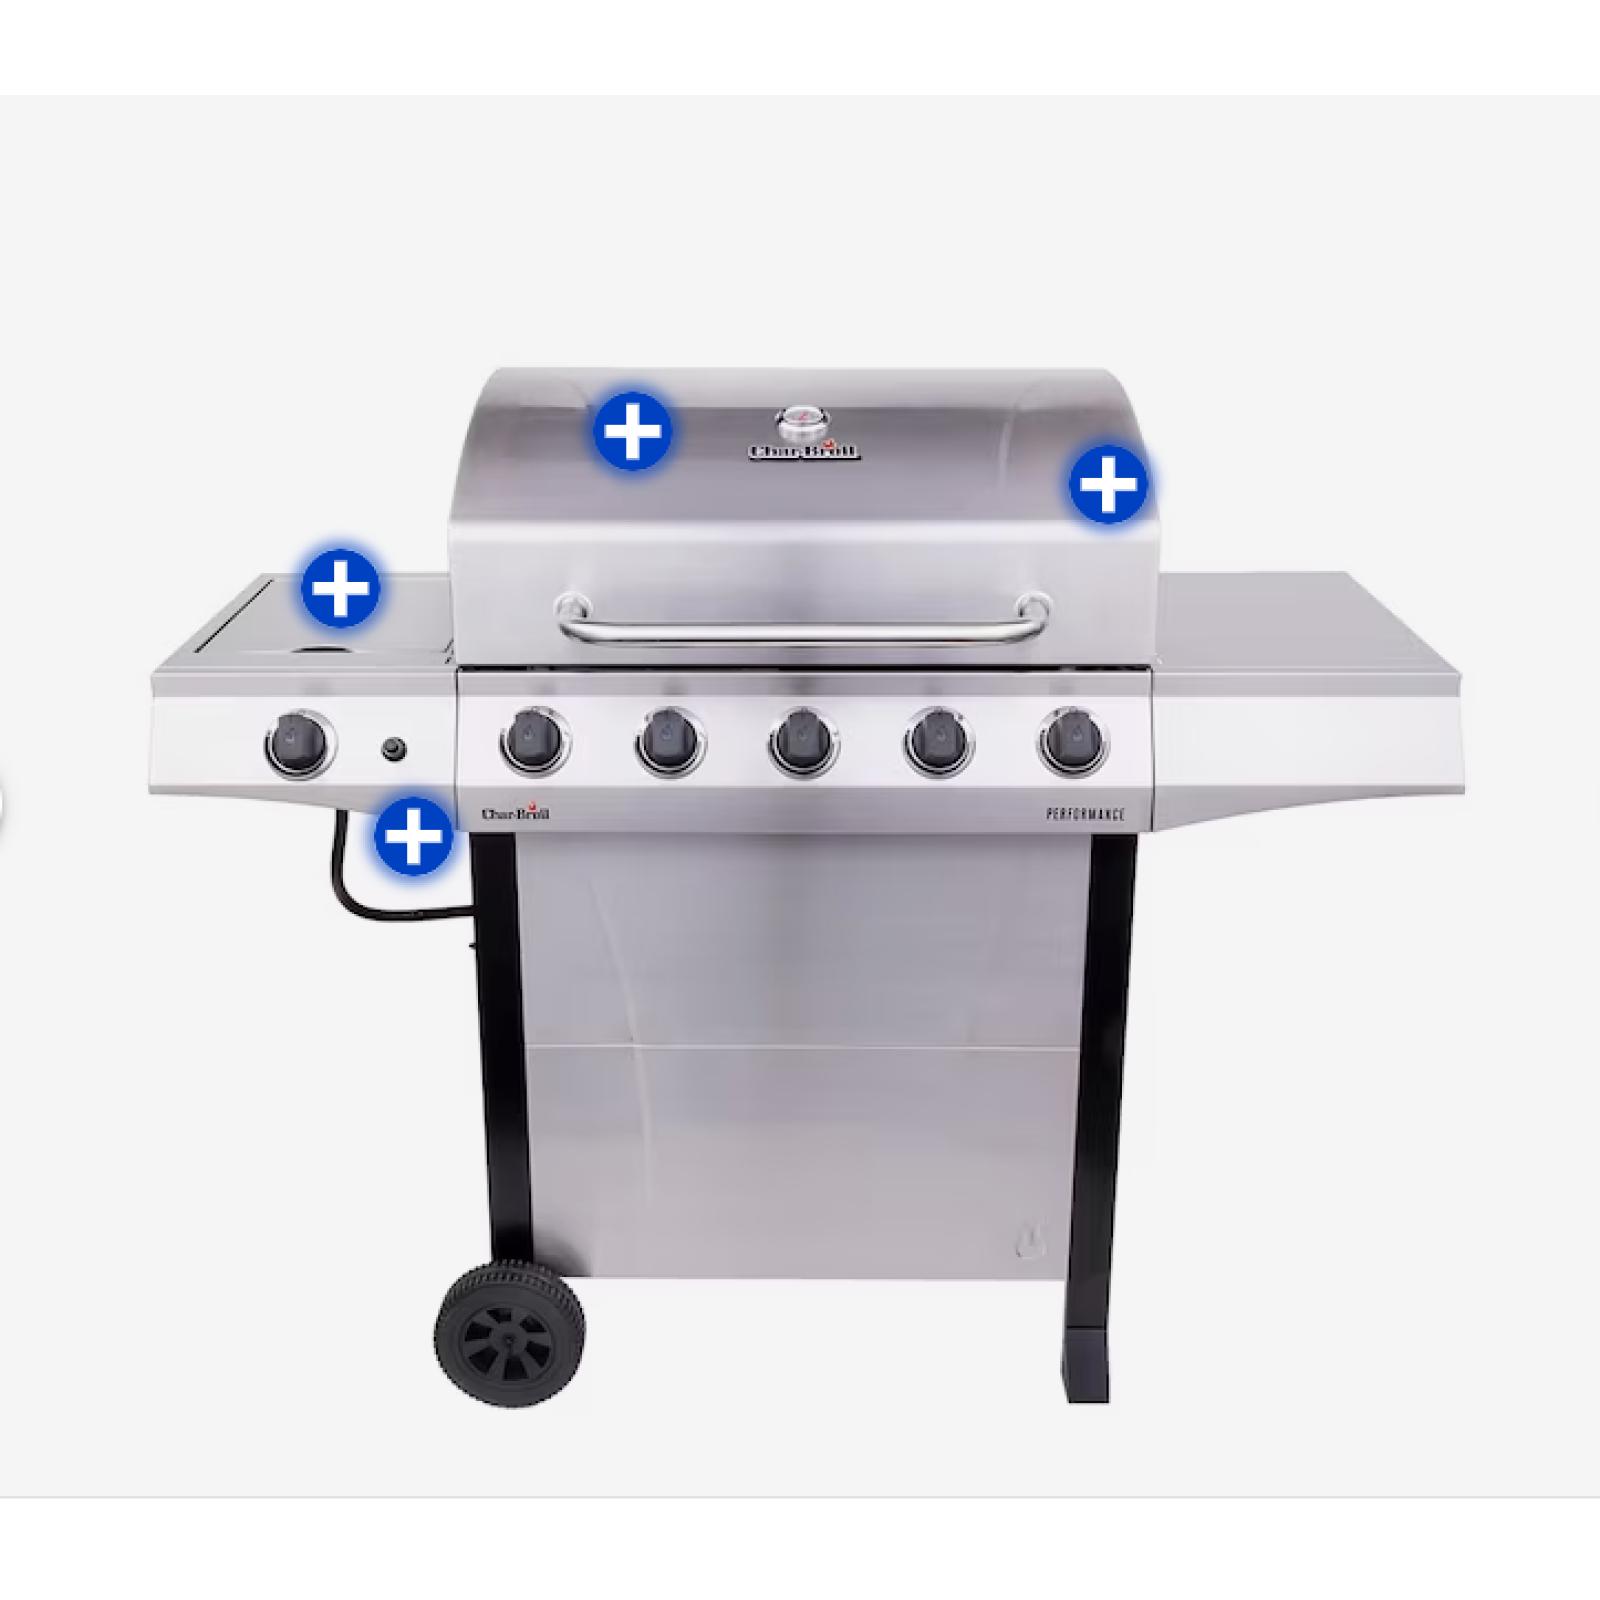 DALLAS LOCATION- NEW! Char-Broil Performance Series Silver 5-Burner Liquid Propane Gas Grill with 1 Side Burner